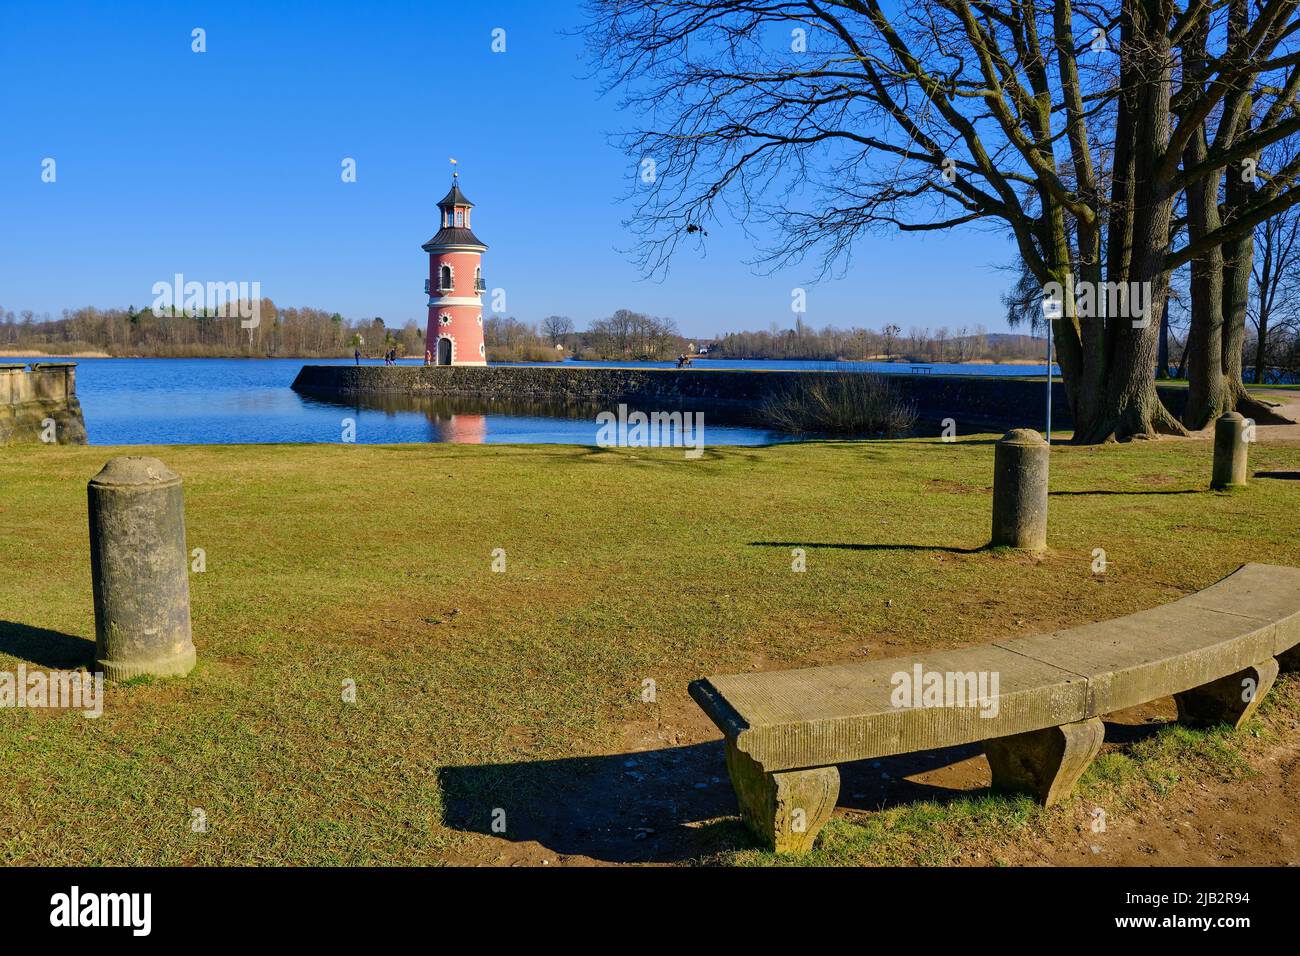 Moritzburg near Dresden, Saxony, Germany, March 1, 2022: The Moritzburg lighthouse at the Moritzburg Great Pond was erected in the 18th century. Stock Photo